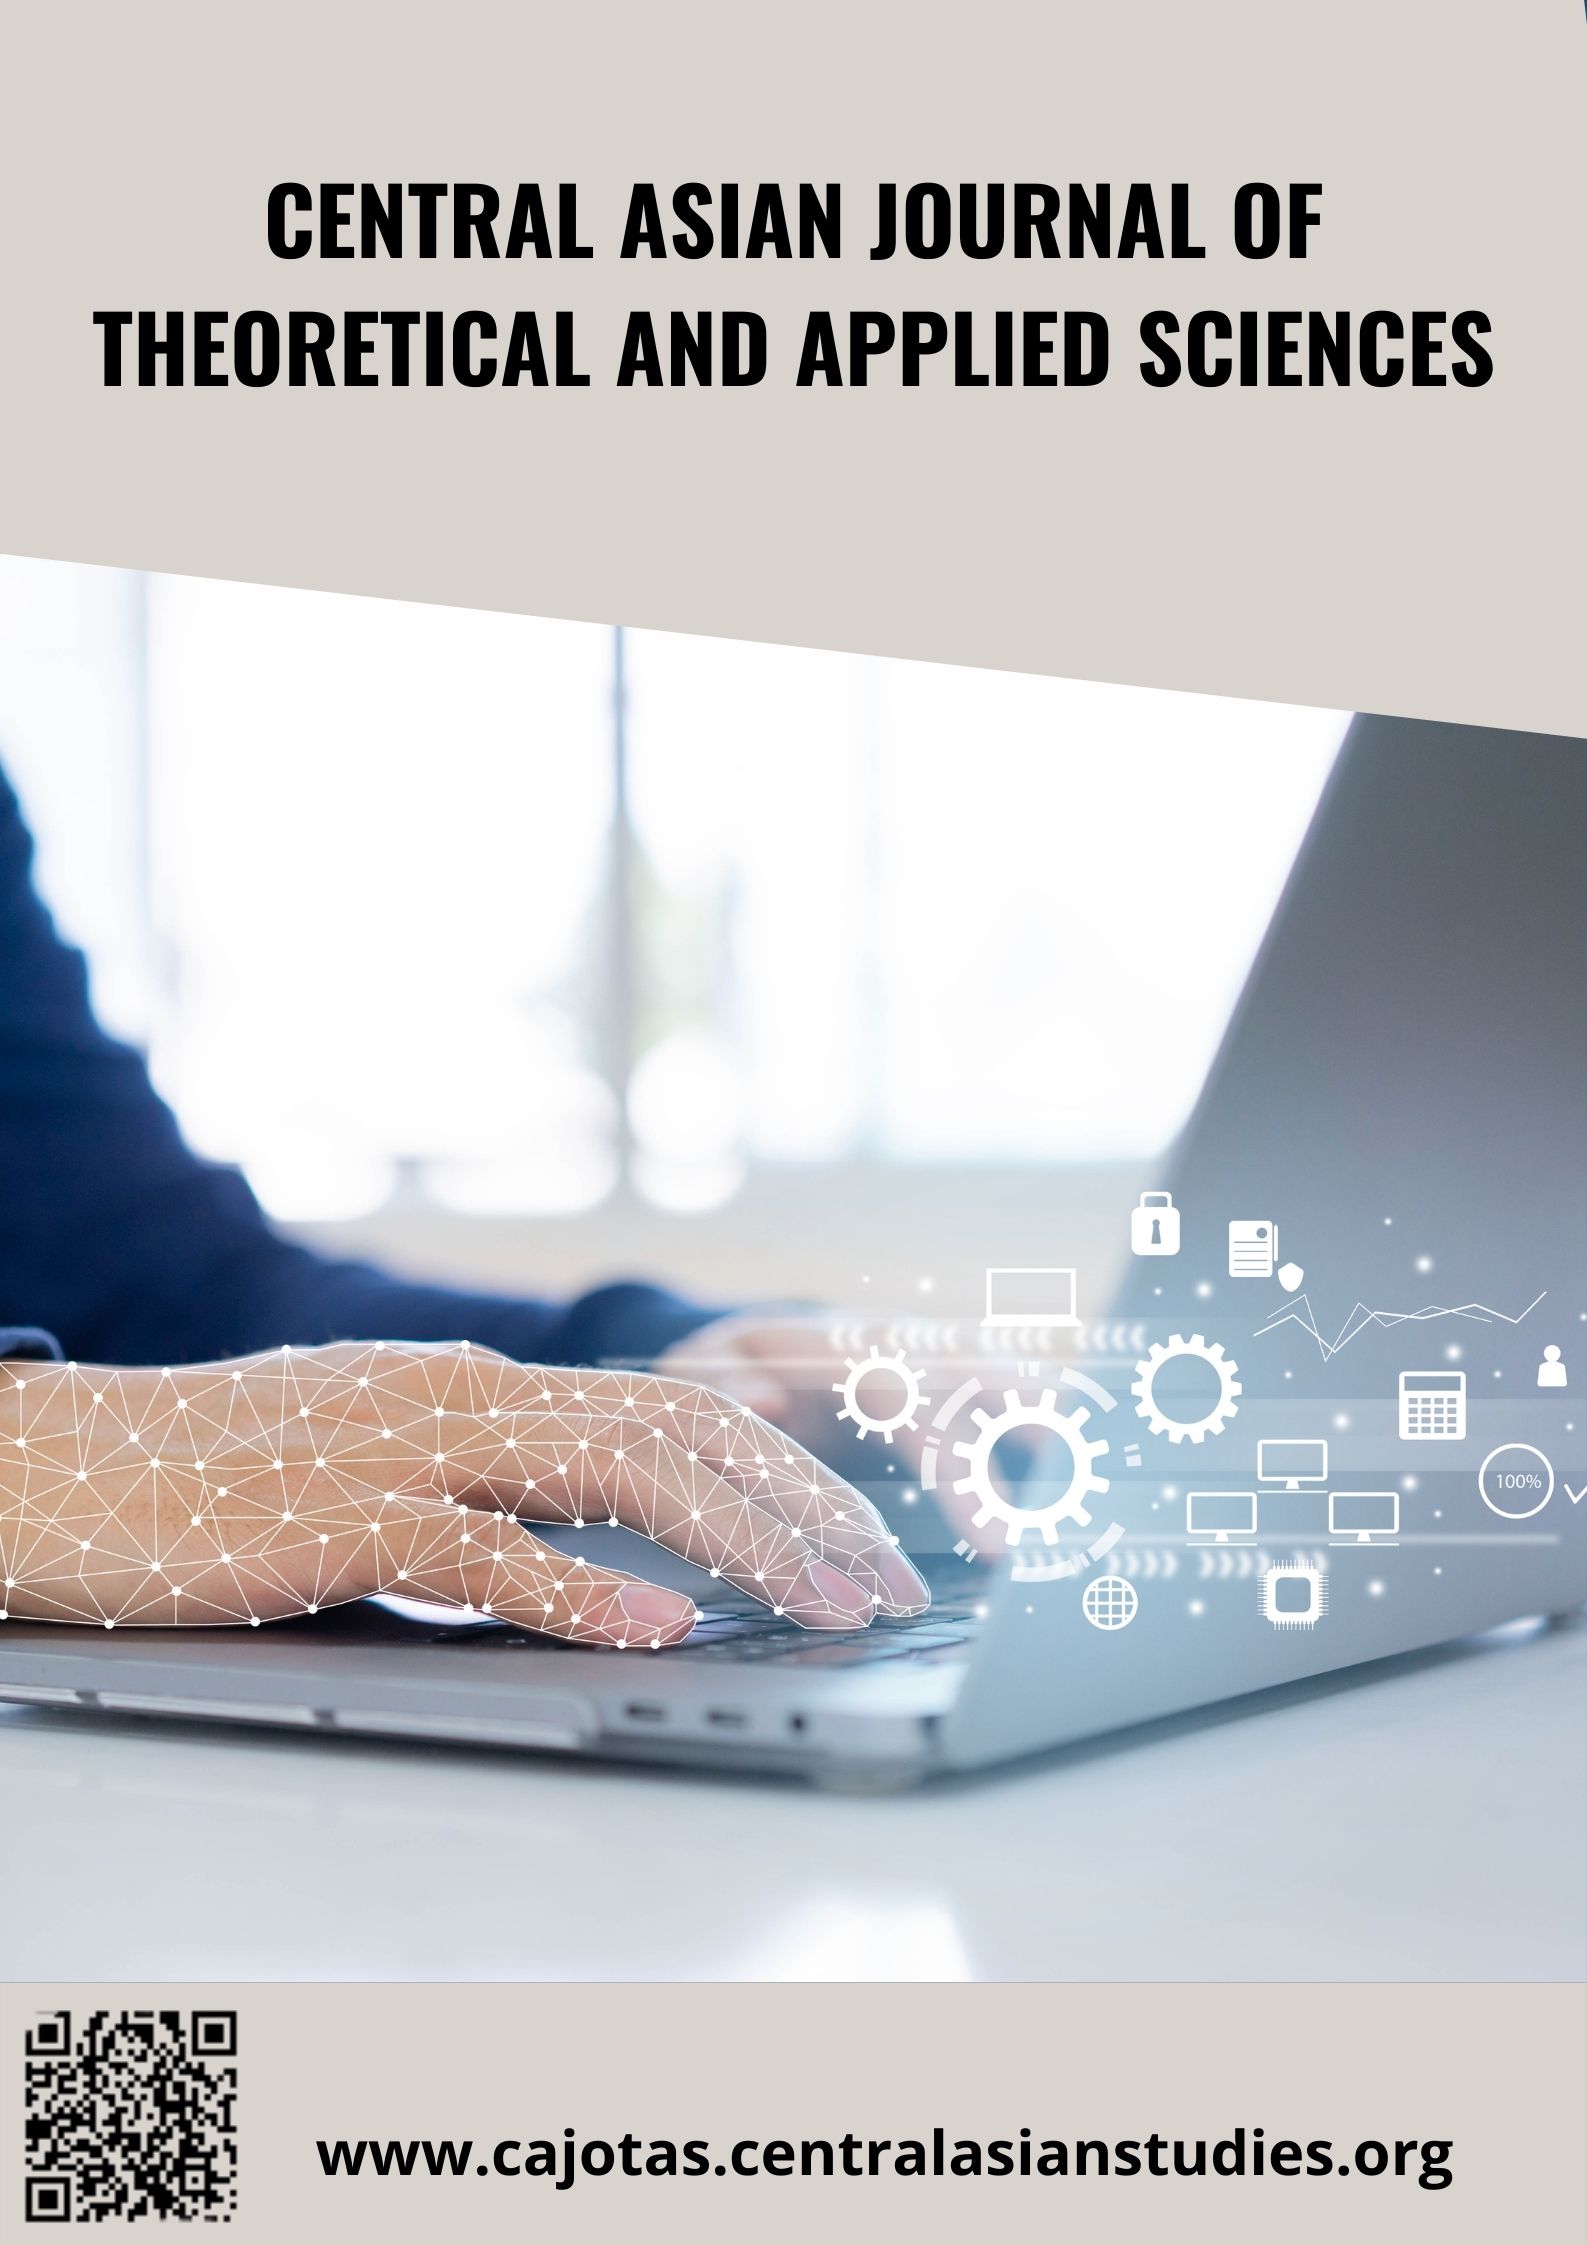 Central Asian Journal of Theoretical and Applied Sciences